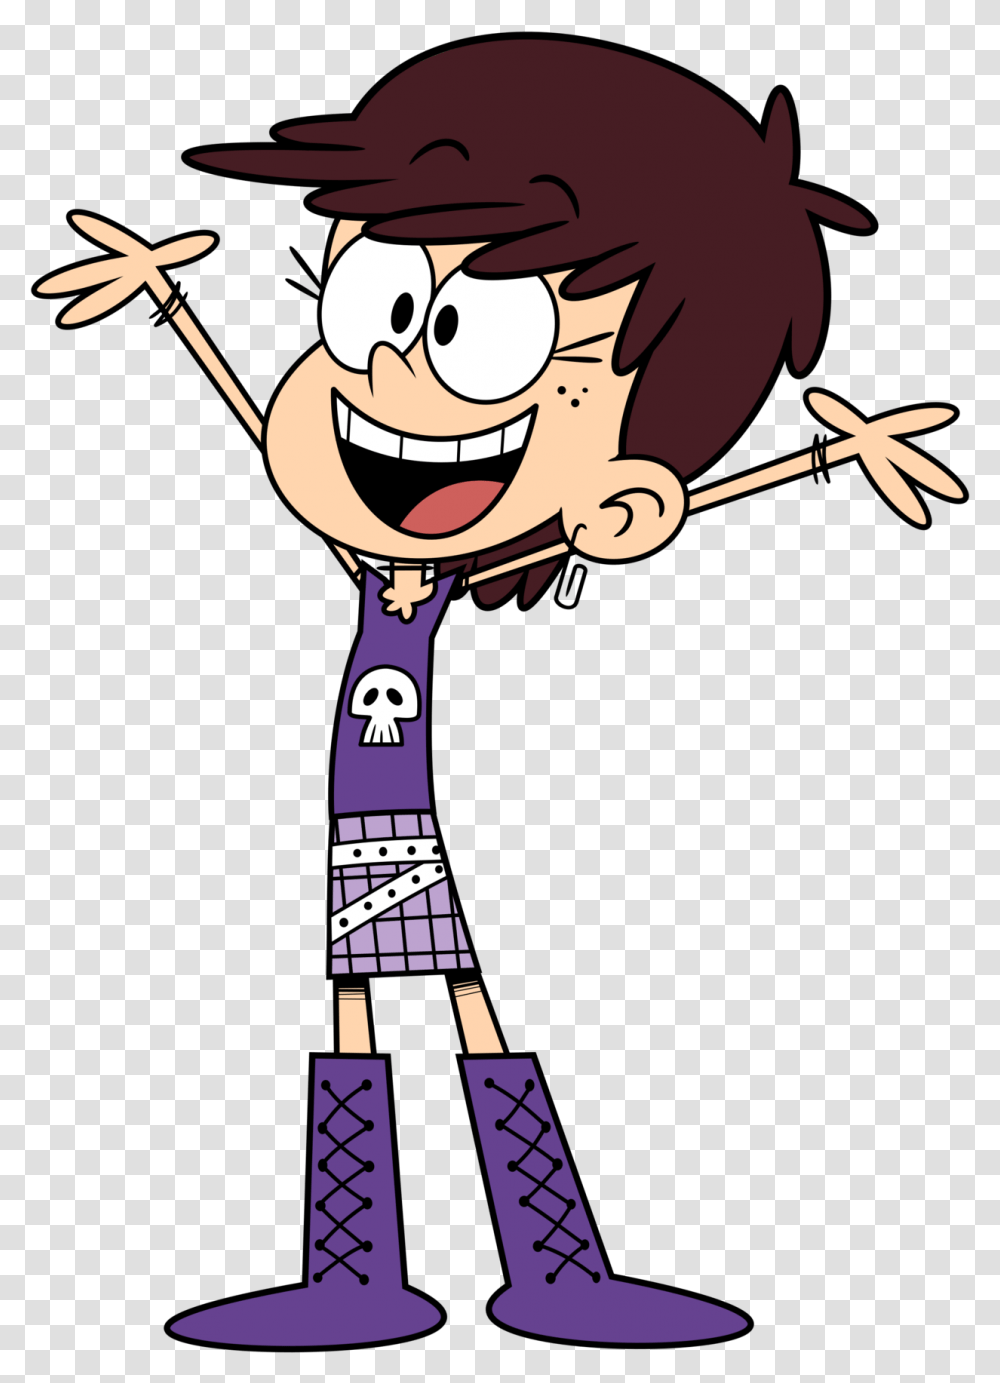 Image Result For The Loud House Season Luna From The Loud House, Weapon, Weaponry, Emblem Transparent Png